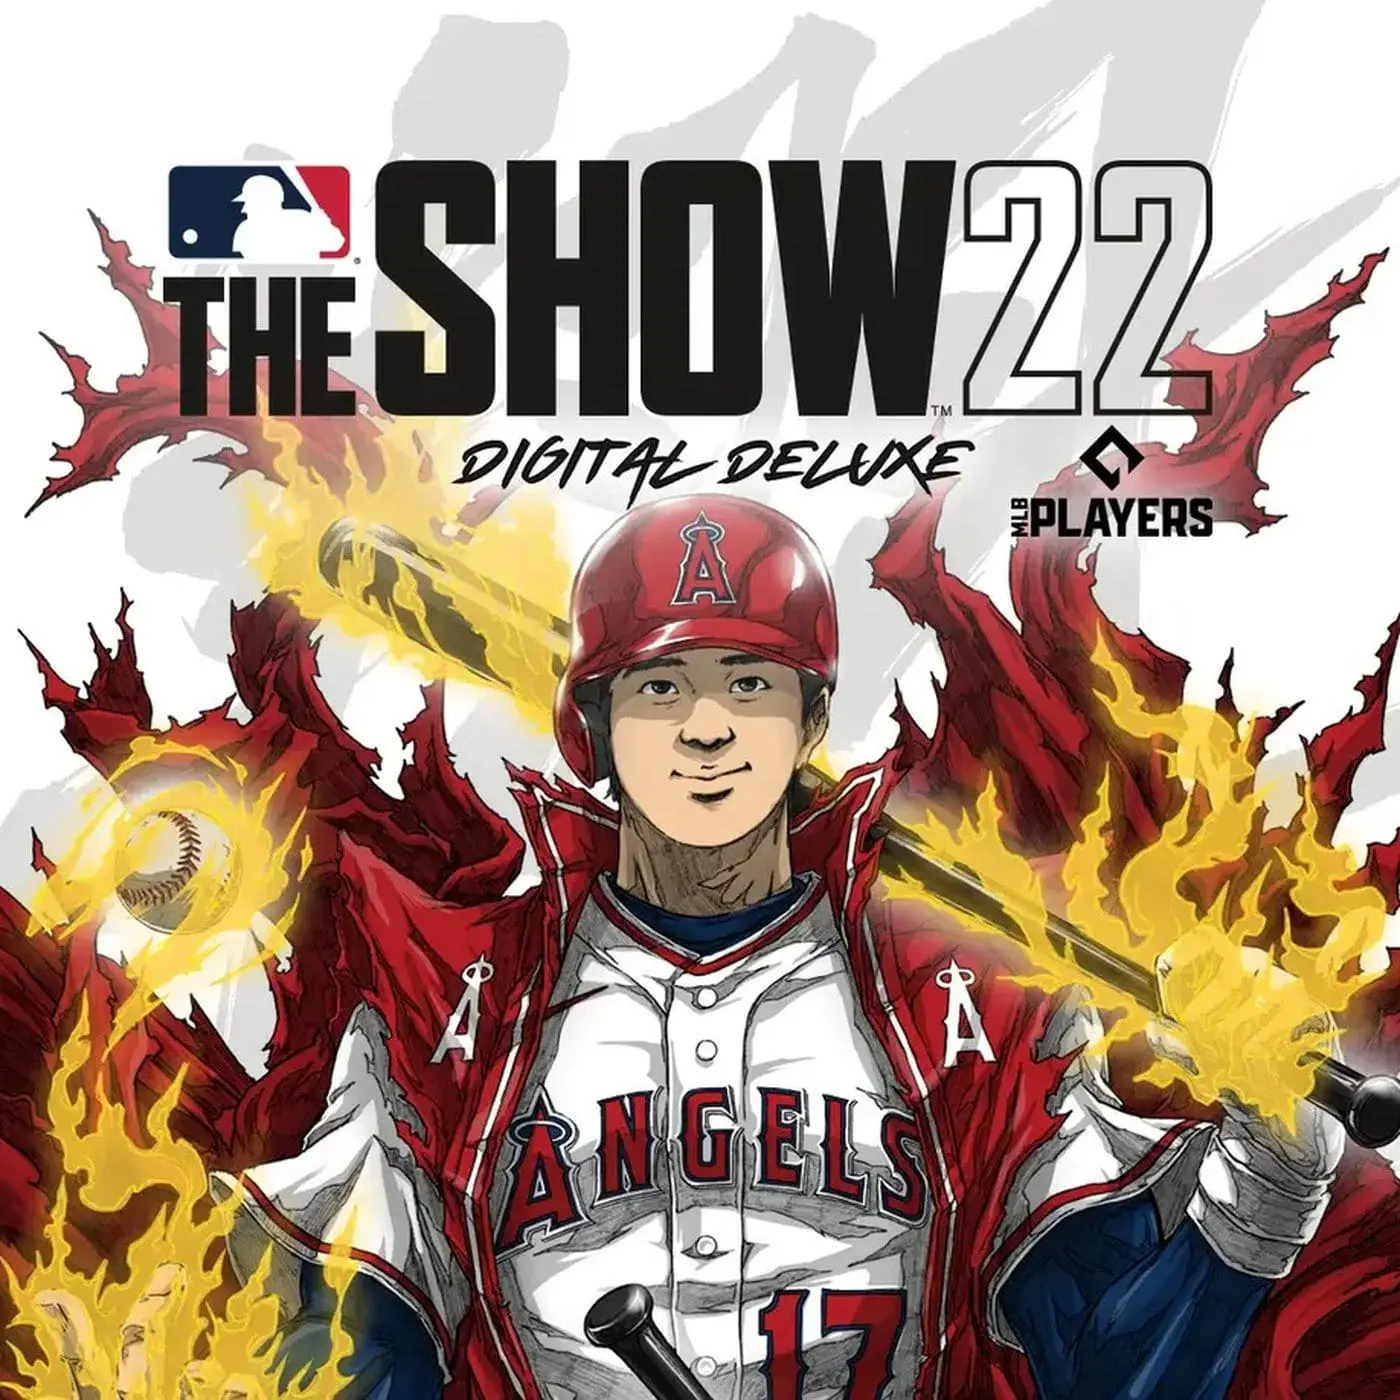 Anime-style Shohei Ohtani on the cover of the MLB the Show 22 video game